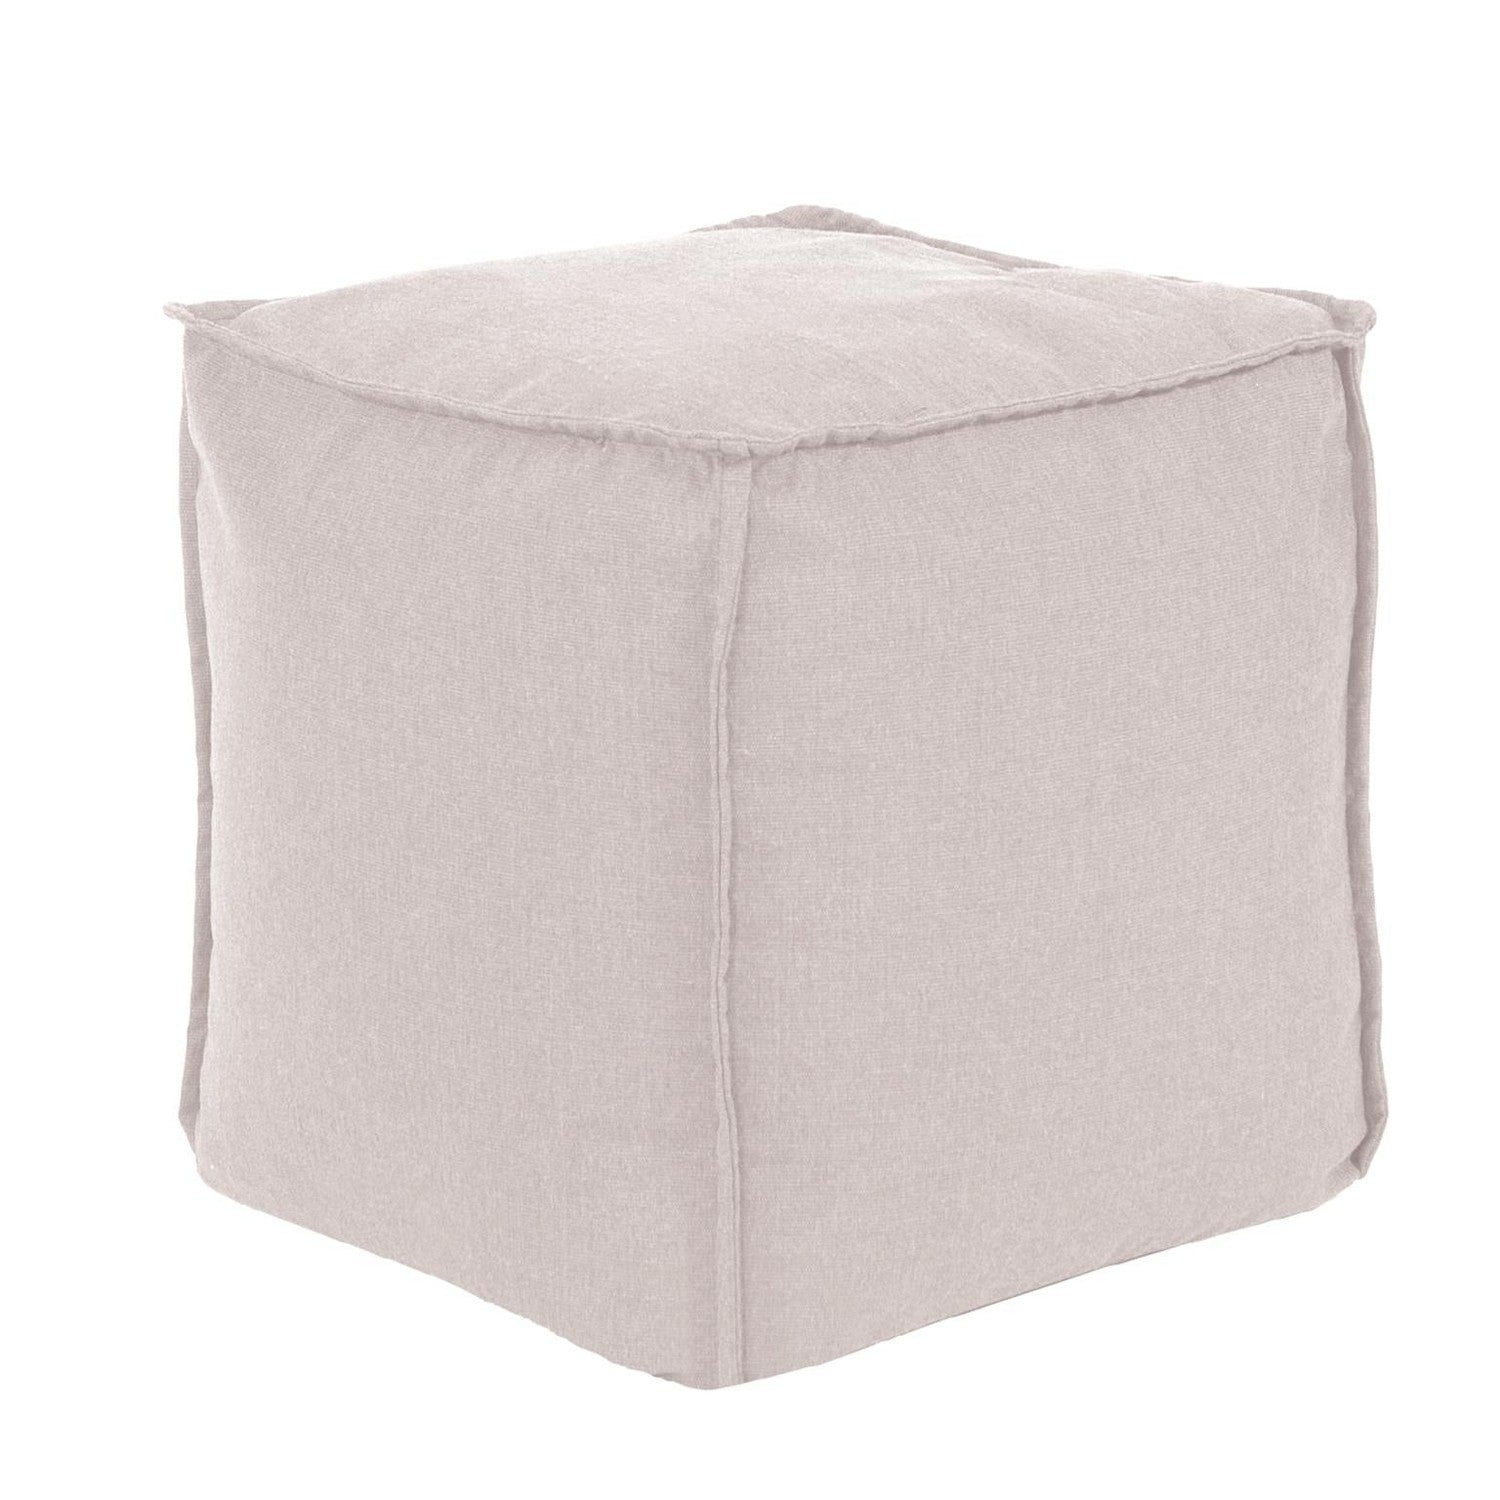 Outdoor Square Pouf-The Howard Elliott Collection-HOWARD-Q873-463-Stools & OttomansSand-Cube Pouf-28-France and Son